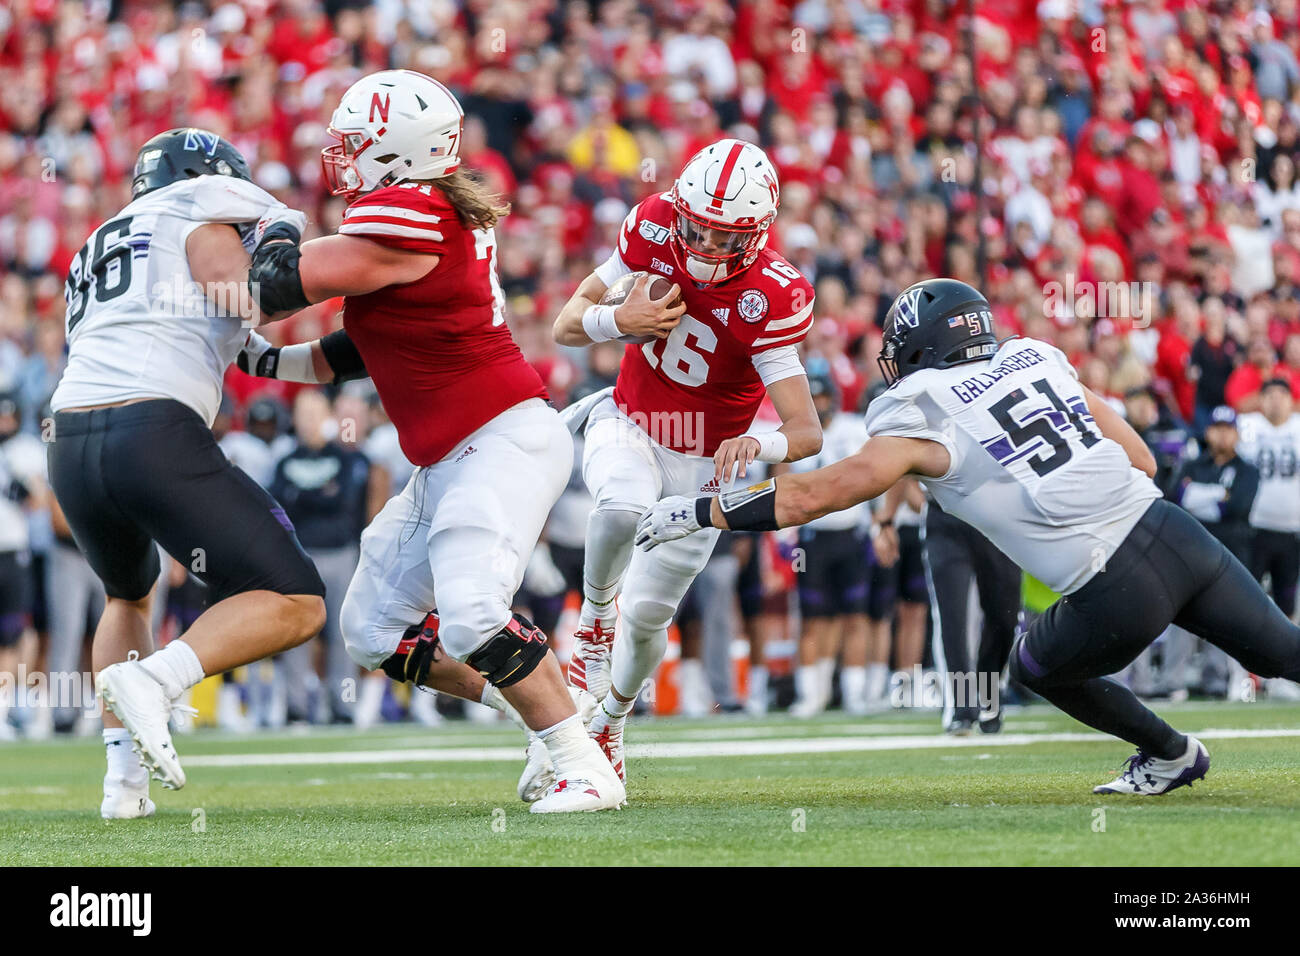 Lincoln, NE. U.S. 05th Oct, 2019. Nebraska Cornhuskers quarterback Noah Vedral #16 rushes late in the 4th quarter to set up the winning field goal in action during a NCAA Division 1 football game between Northwestern Wildcats and the Nebraska Cornhuskers at Memorial Stadium in Lincoln, NE. Attendance: 89,384.Nebraska won 13-10.Michael Spomer/Cal Sport Media/Alamy Live News Stock Photo